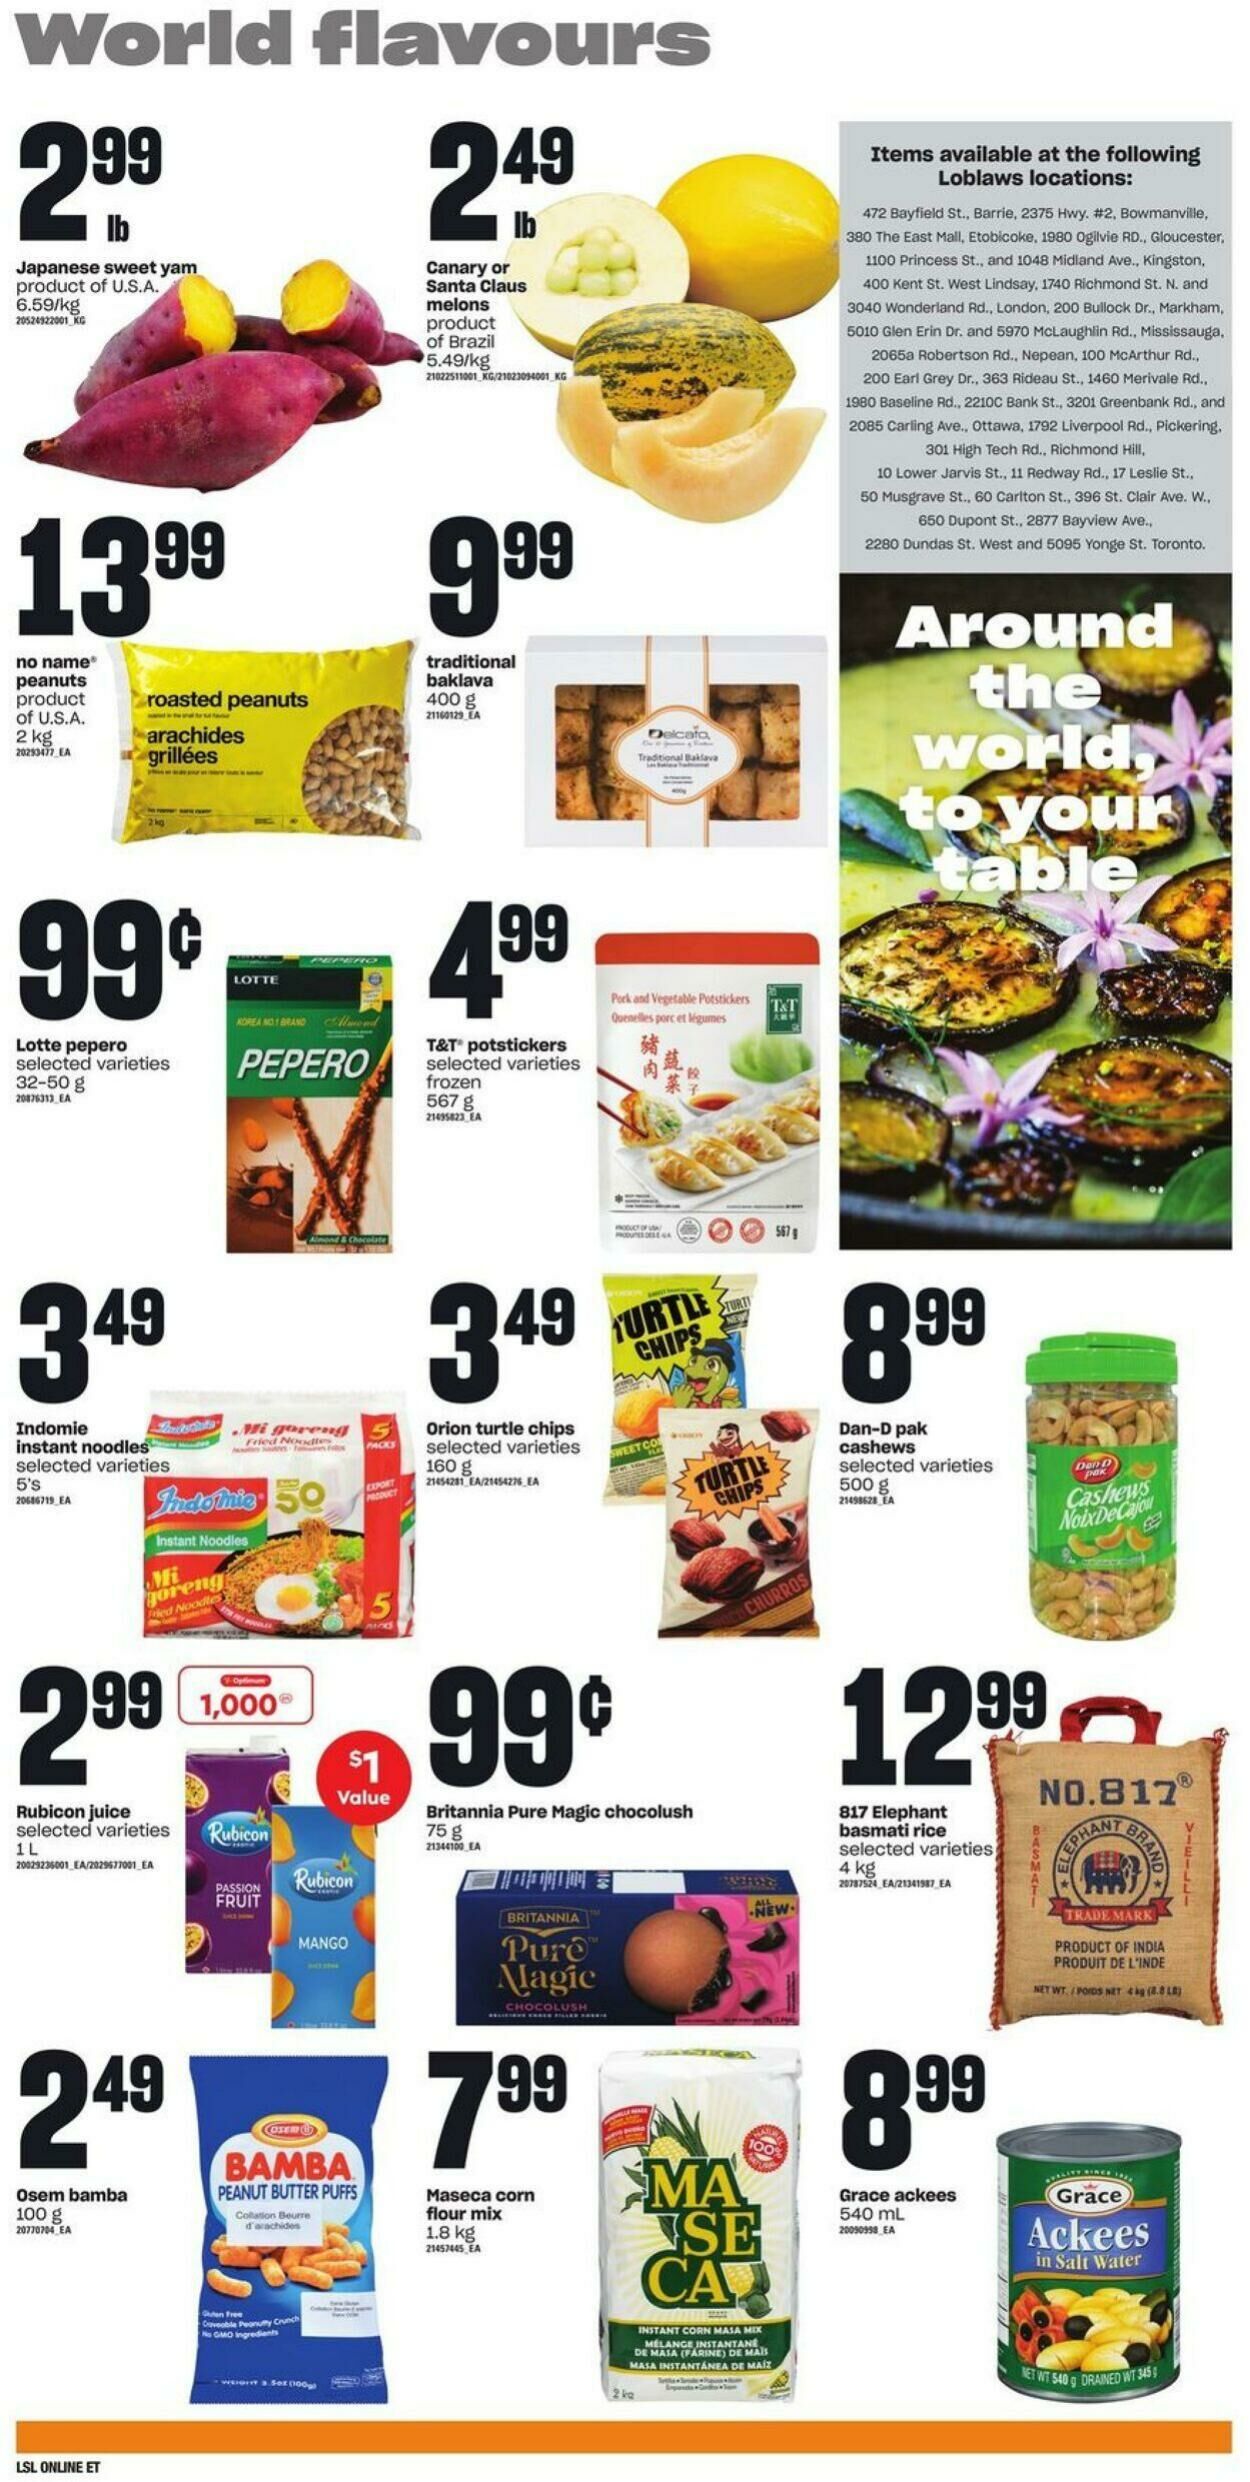 Loblaws Flyer from 12/07/2023